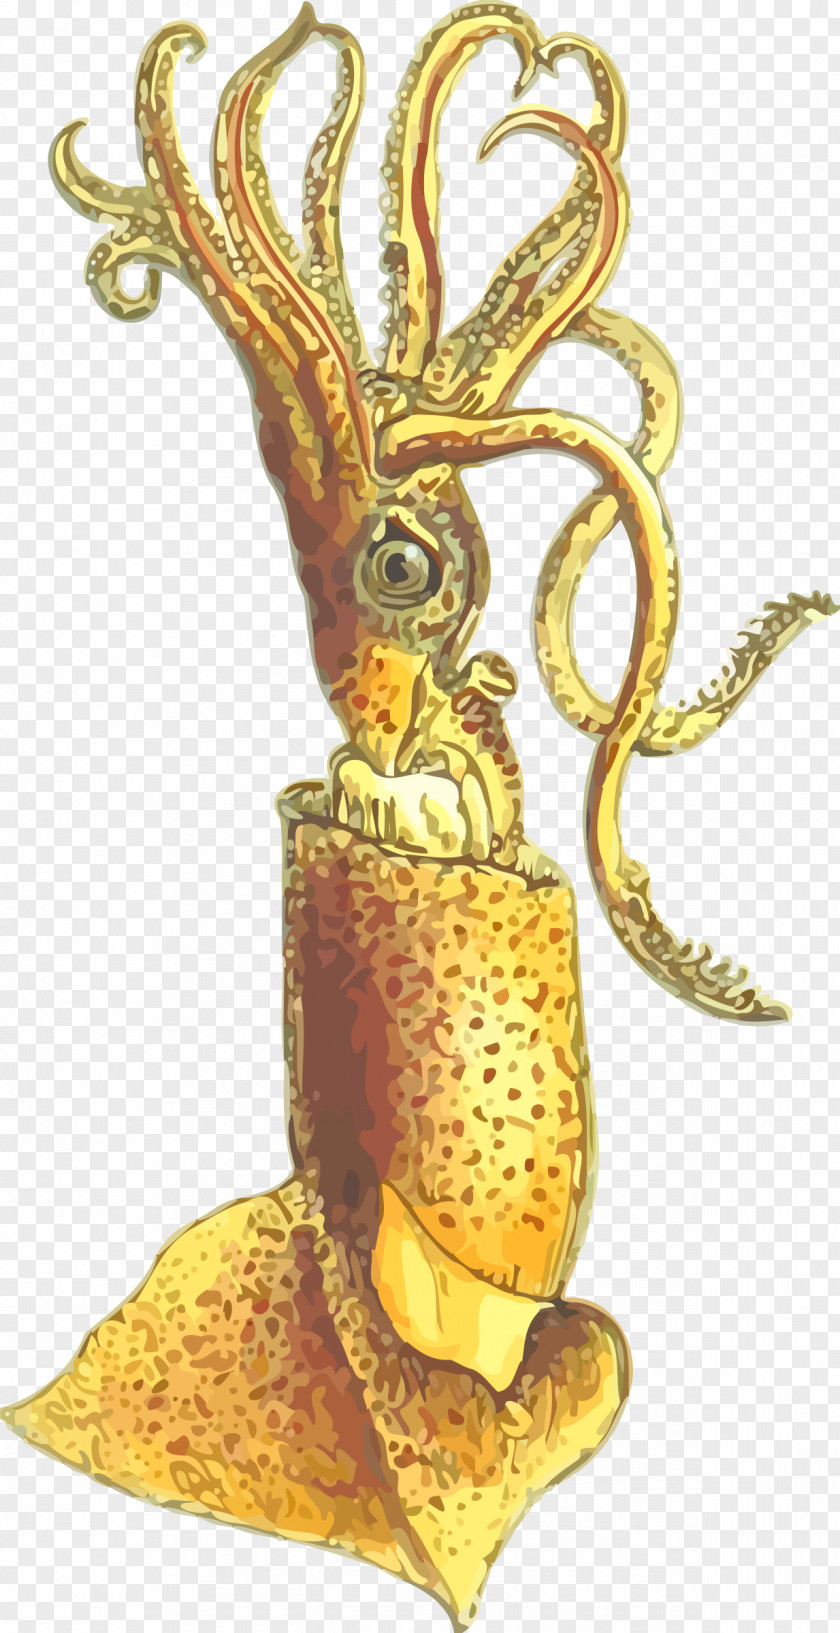 Illustrations Squid Cephalopod Clip Art PNG